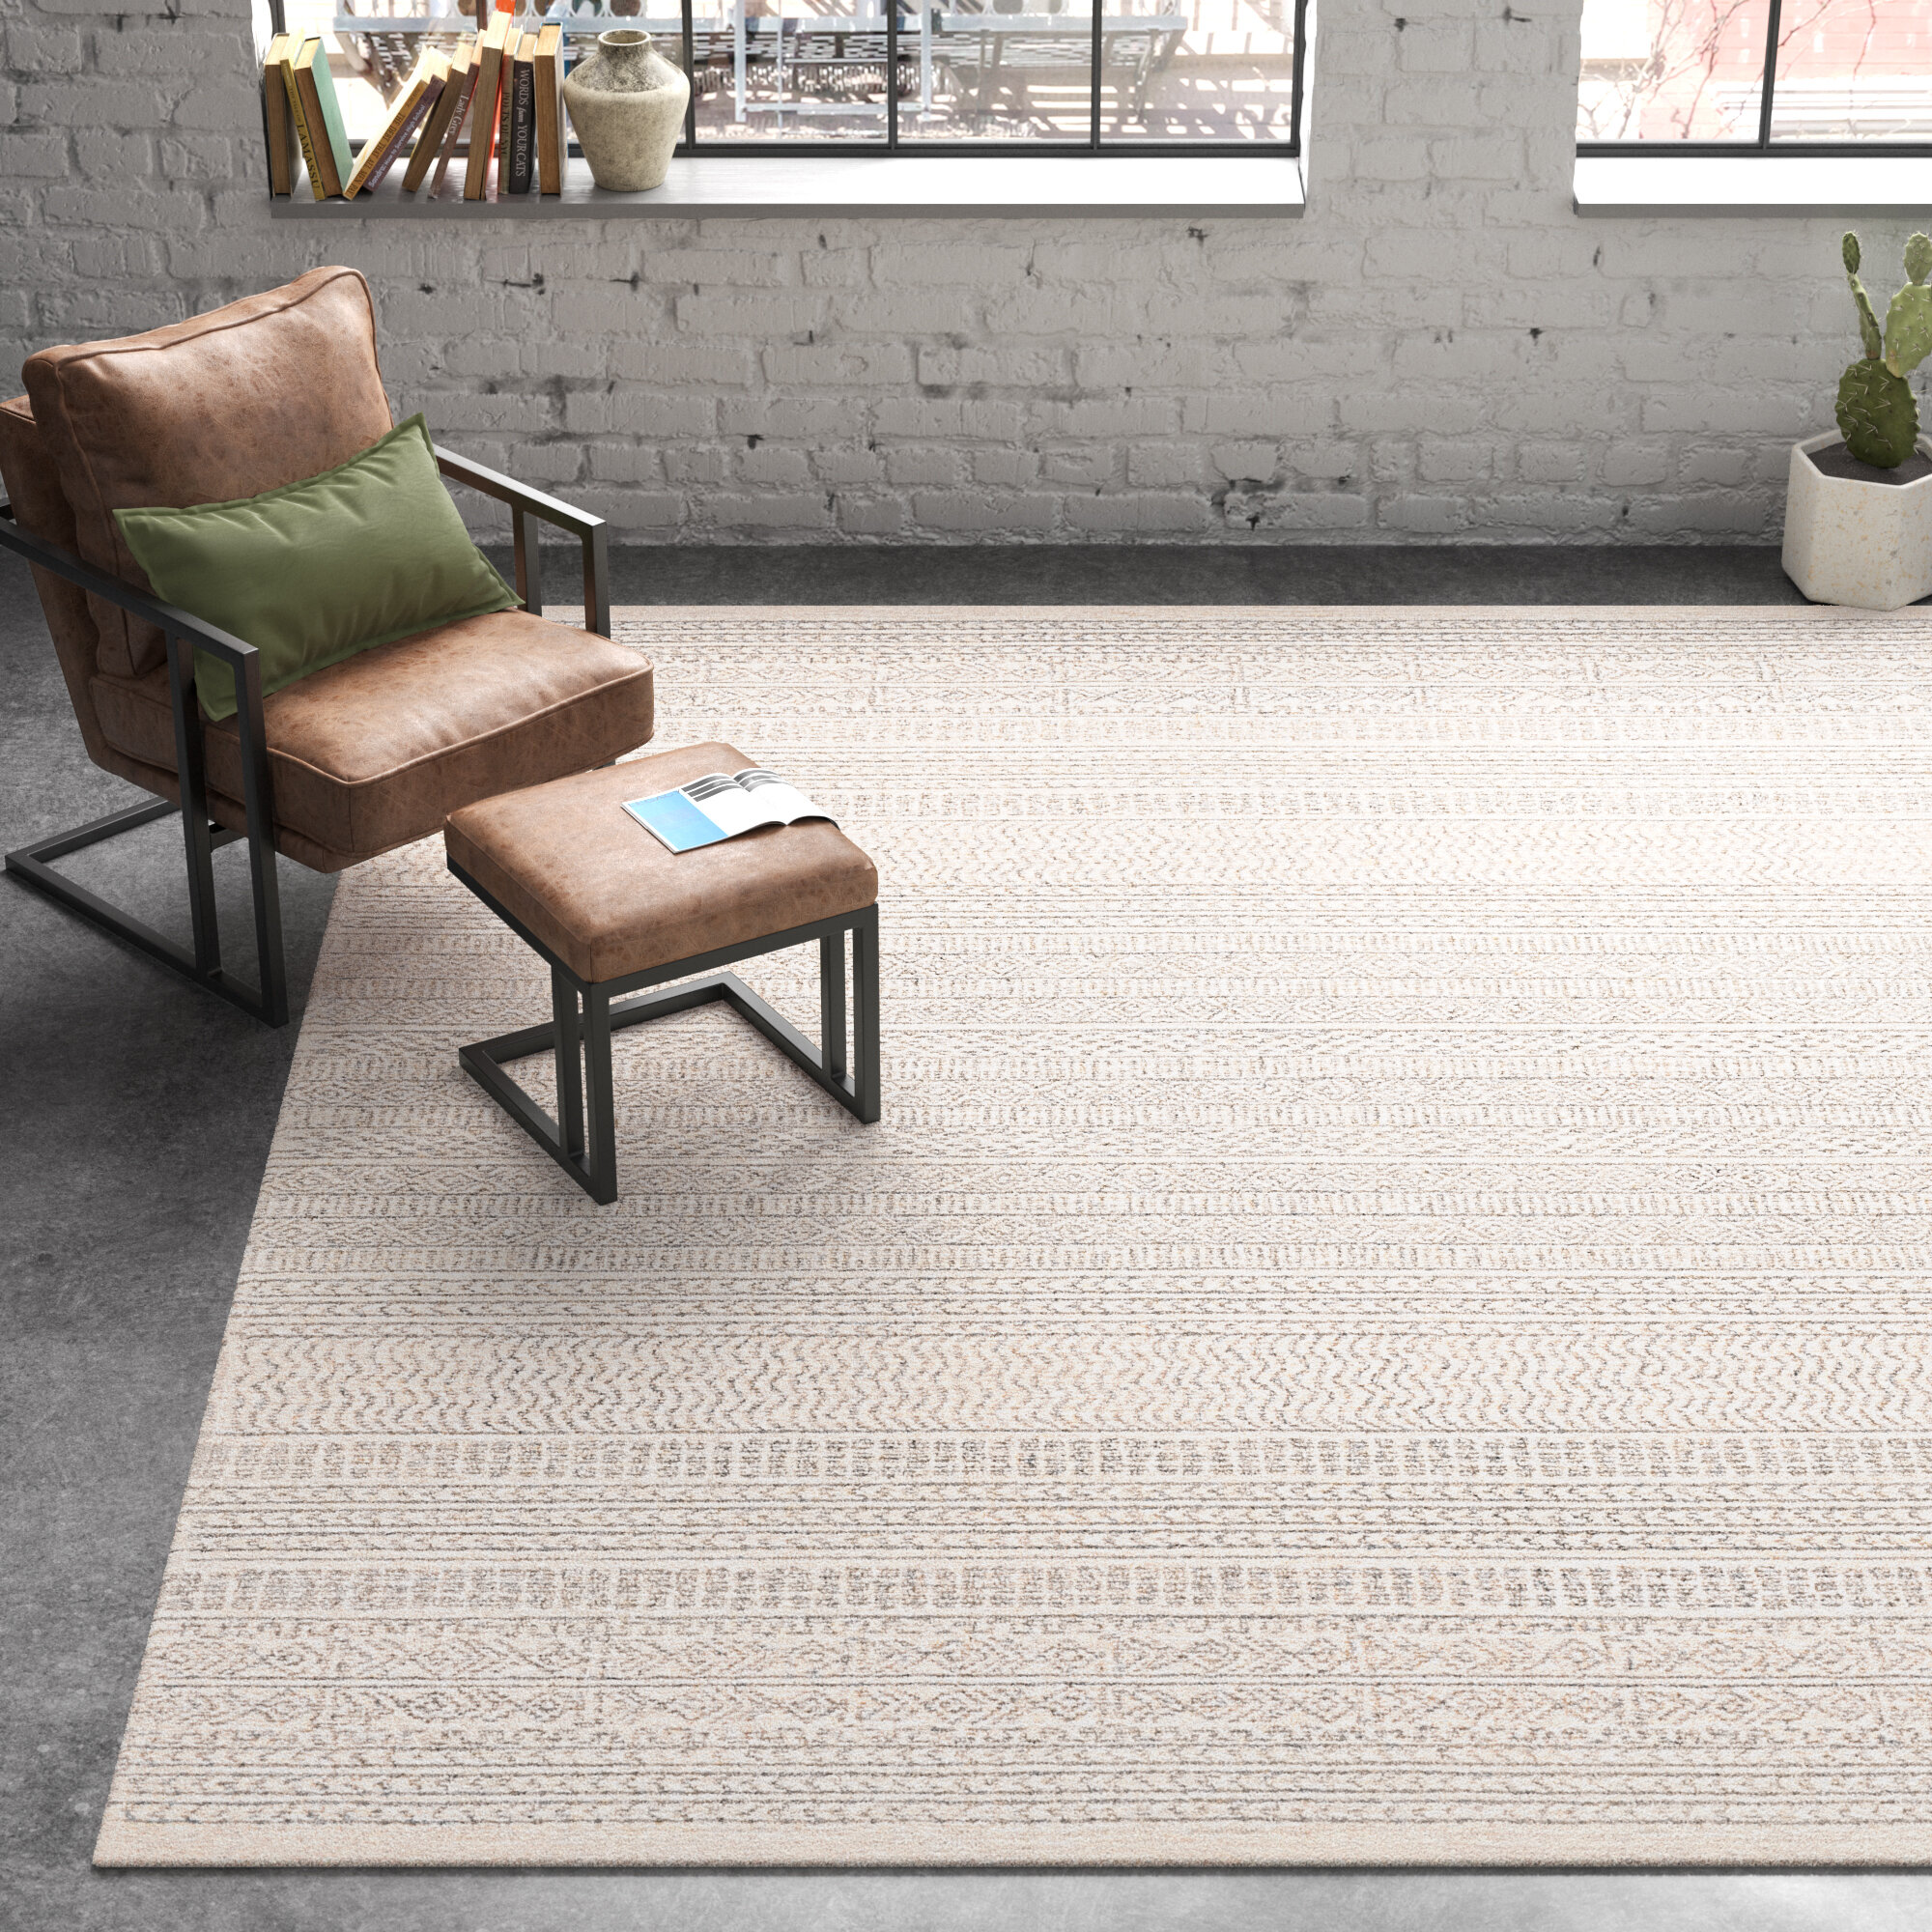 PURE WOOL RUG...FREE DELIVERY. THICK BRAND NEW LUXURY 8' x 5' LOUNGE RUG 